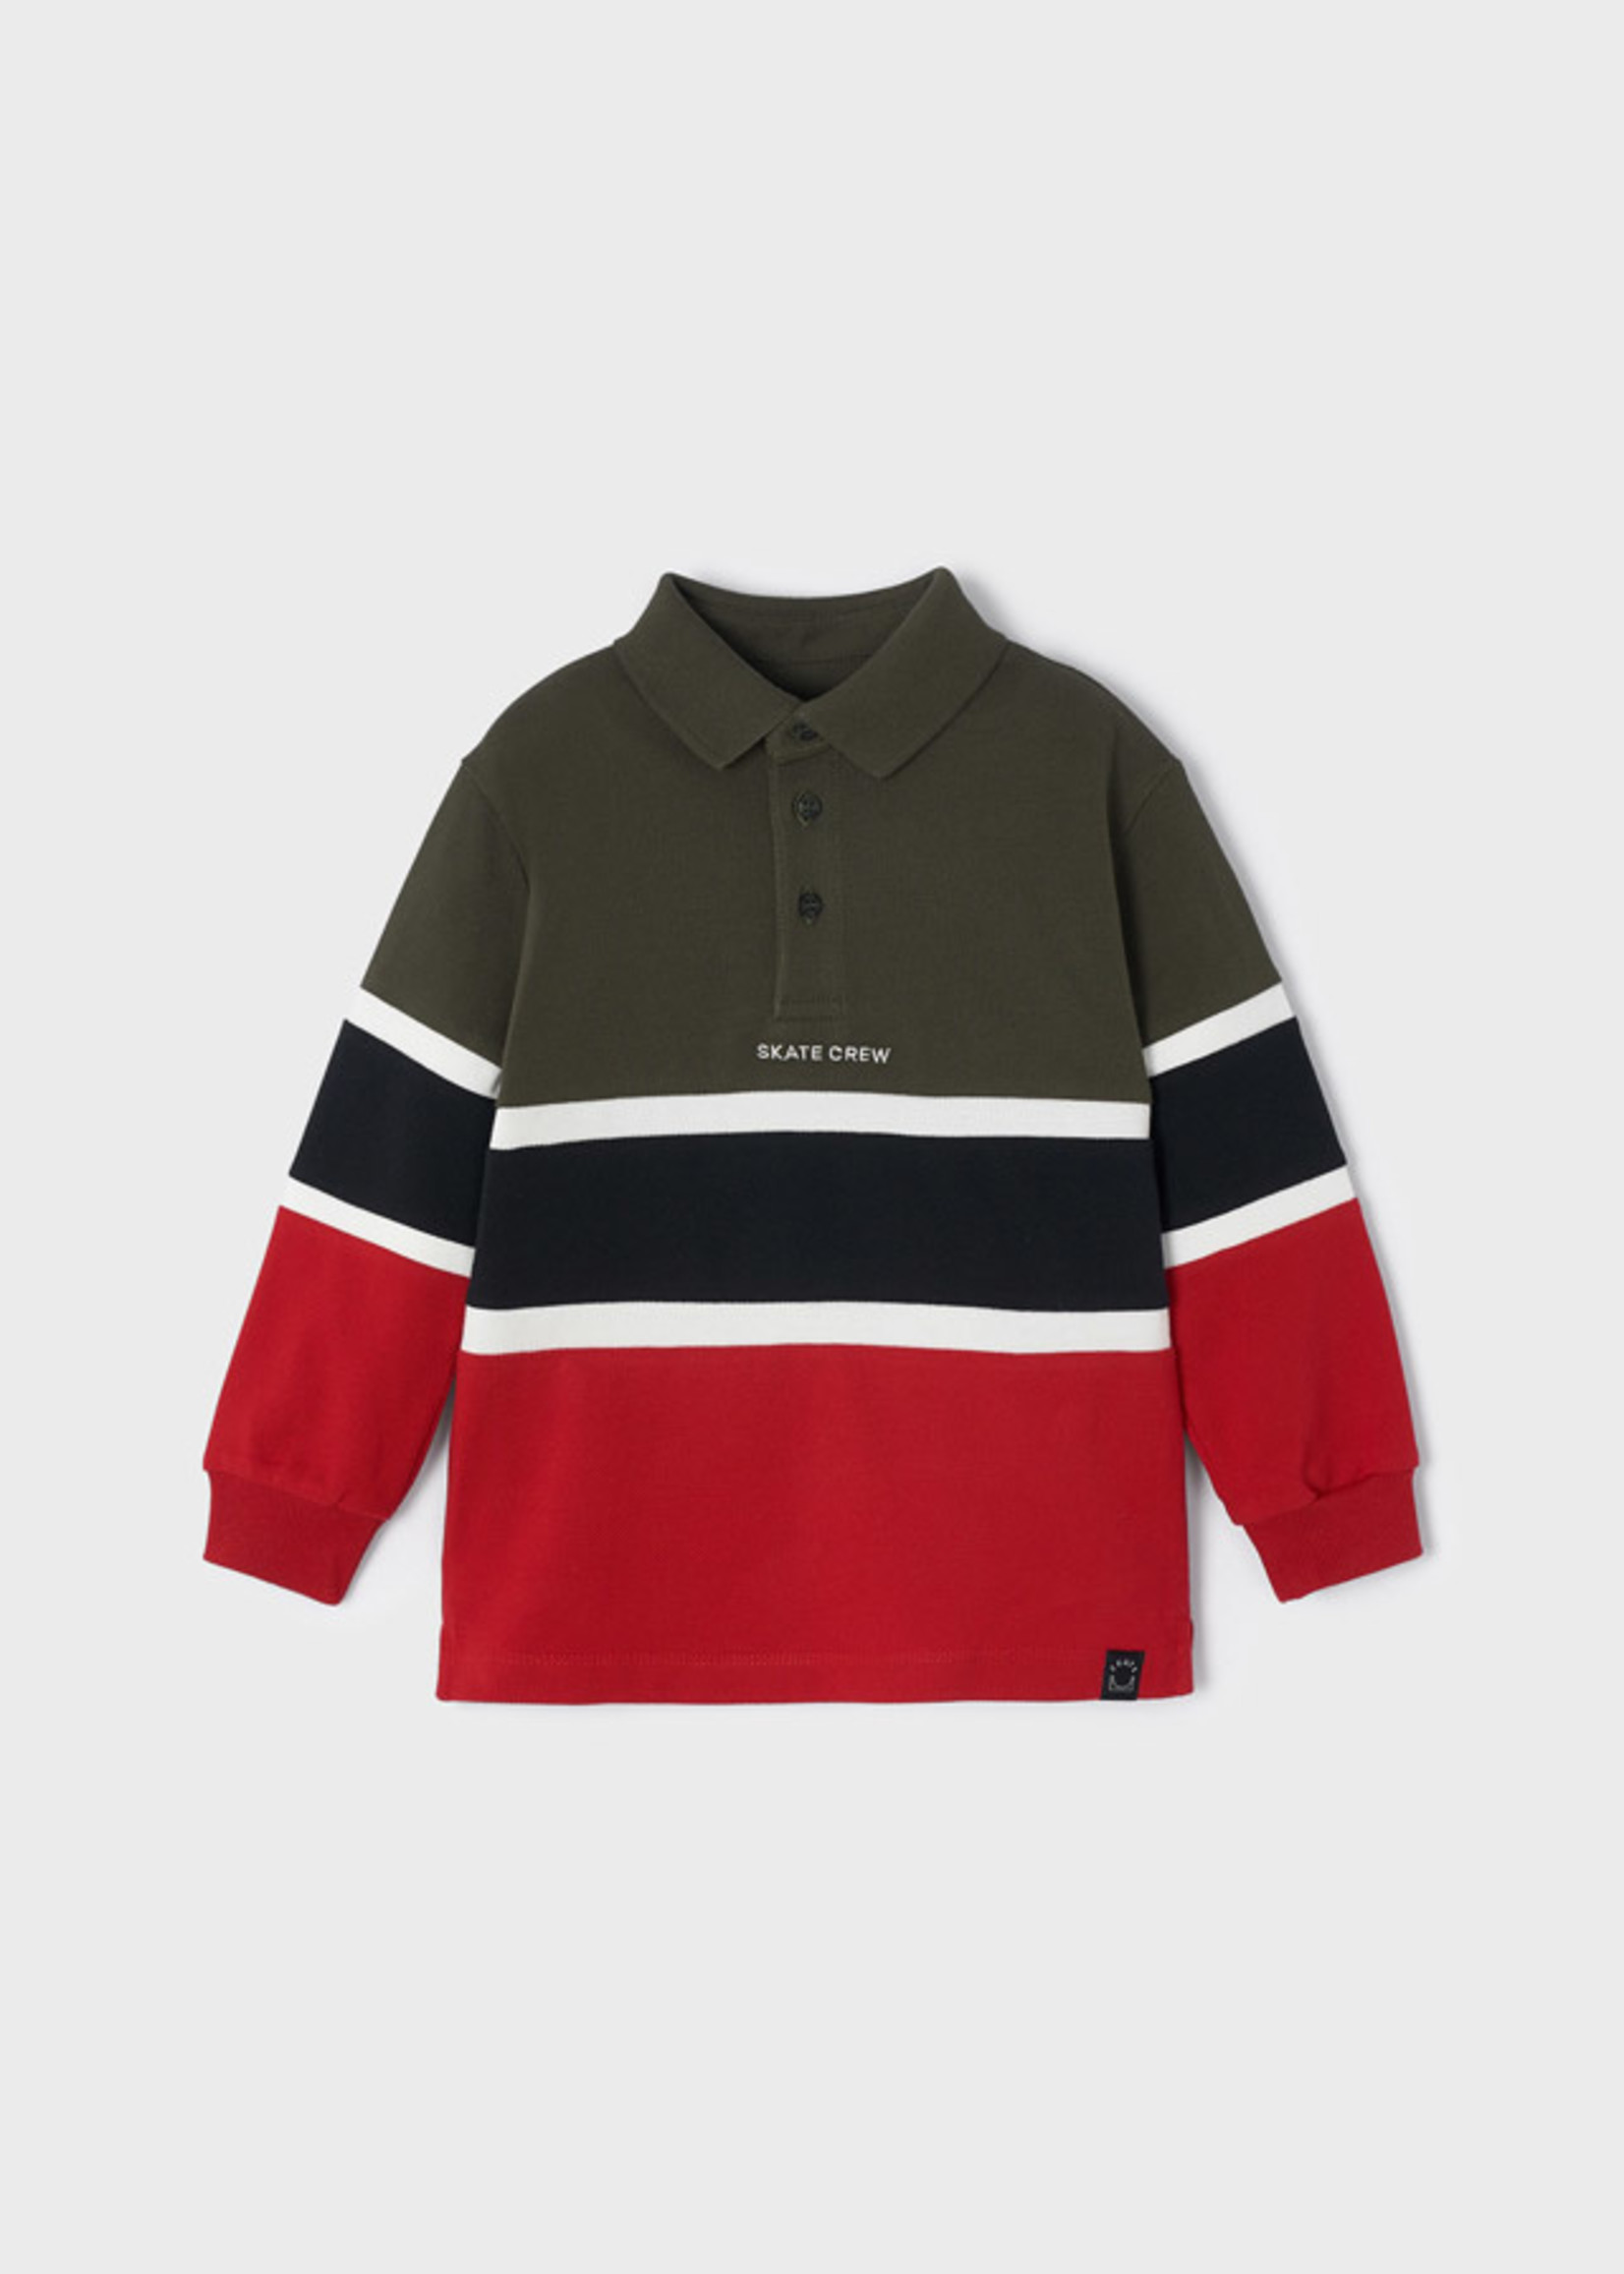 Mayoral L/s Polo                      Jade